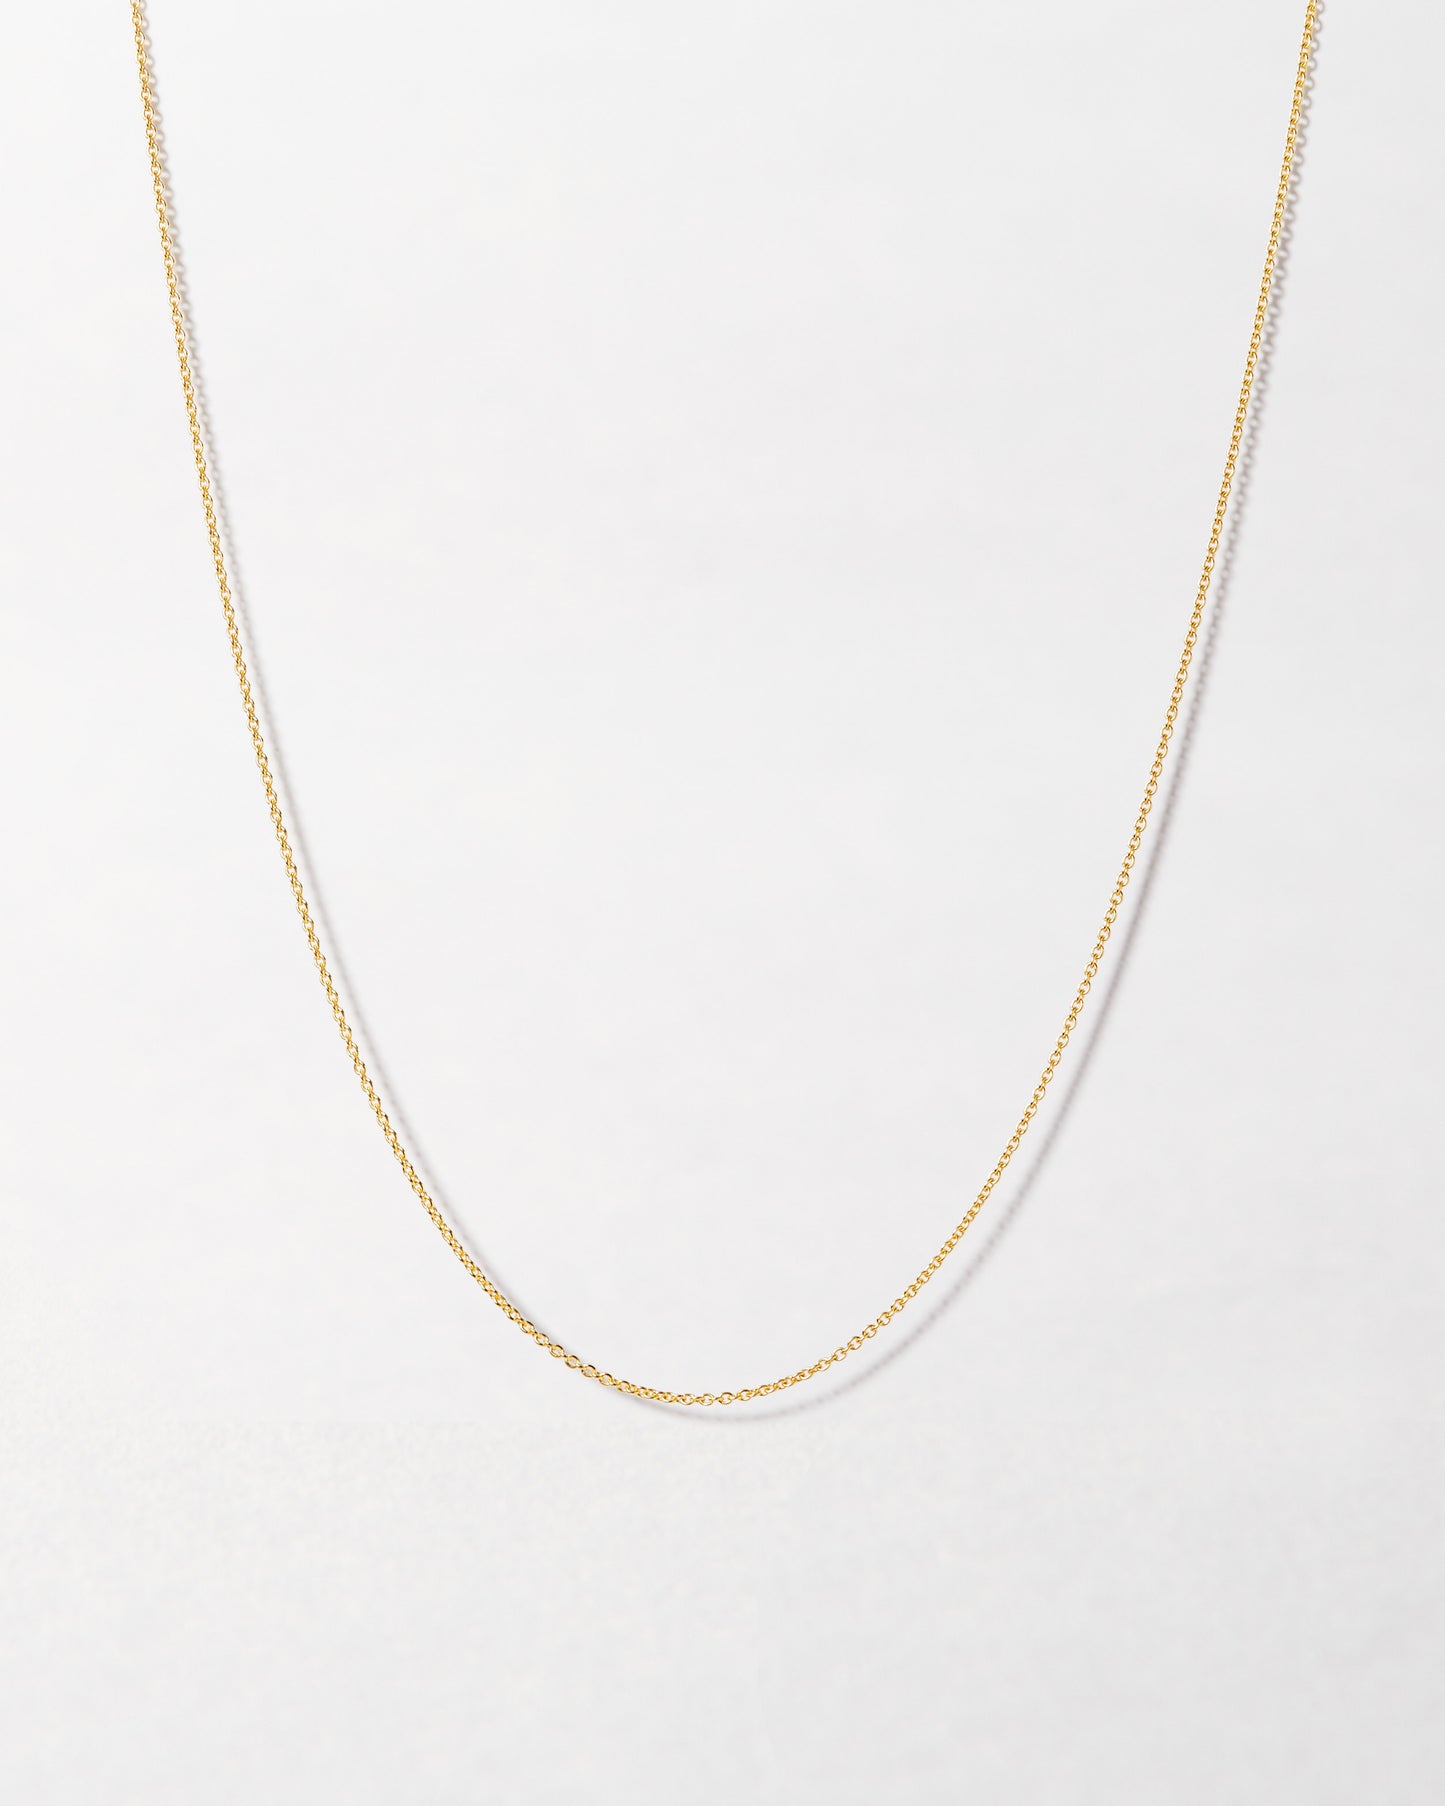 Eve Fine Chain Necklace